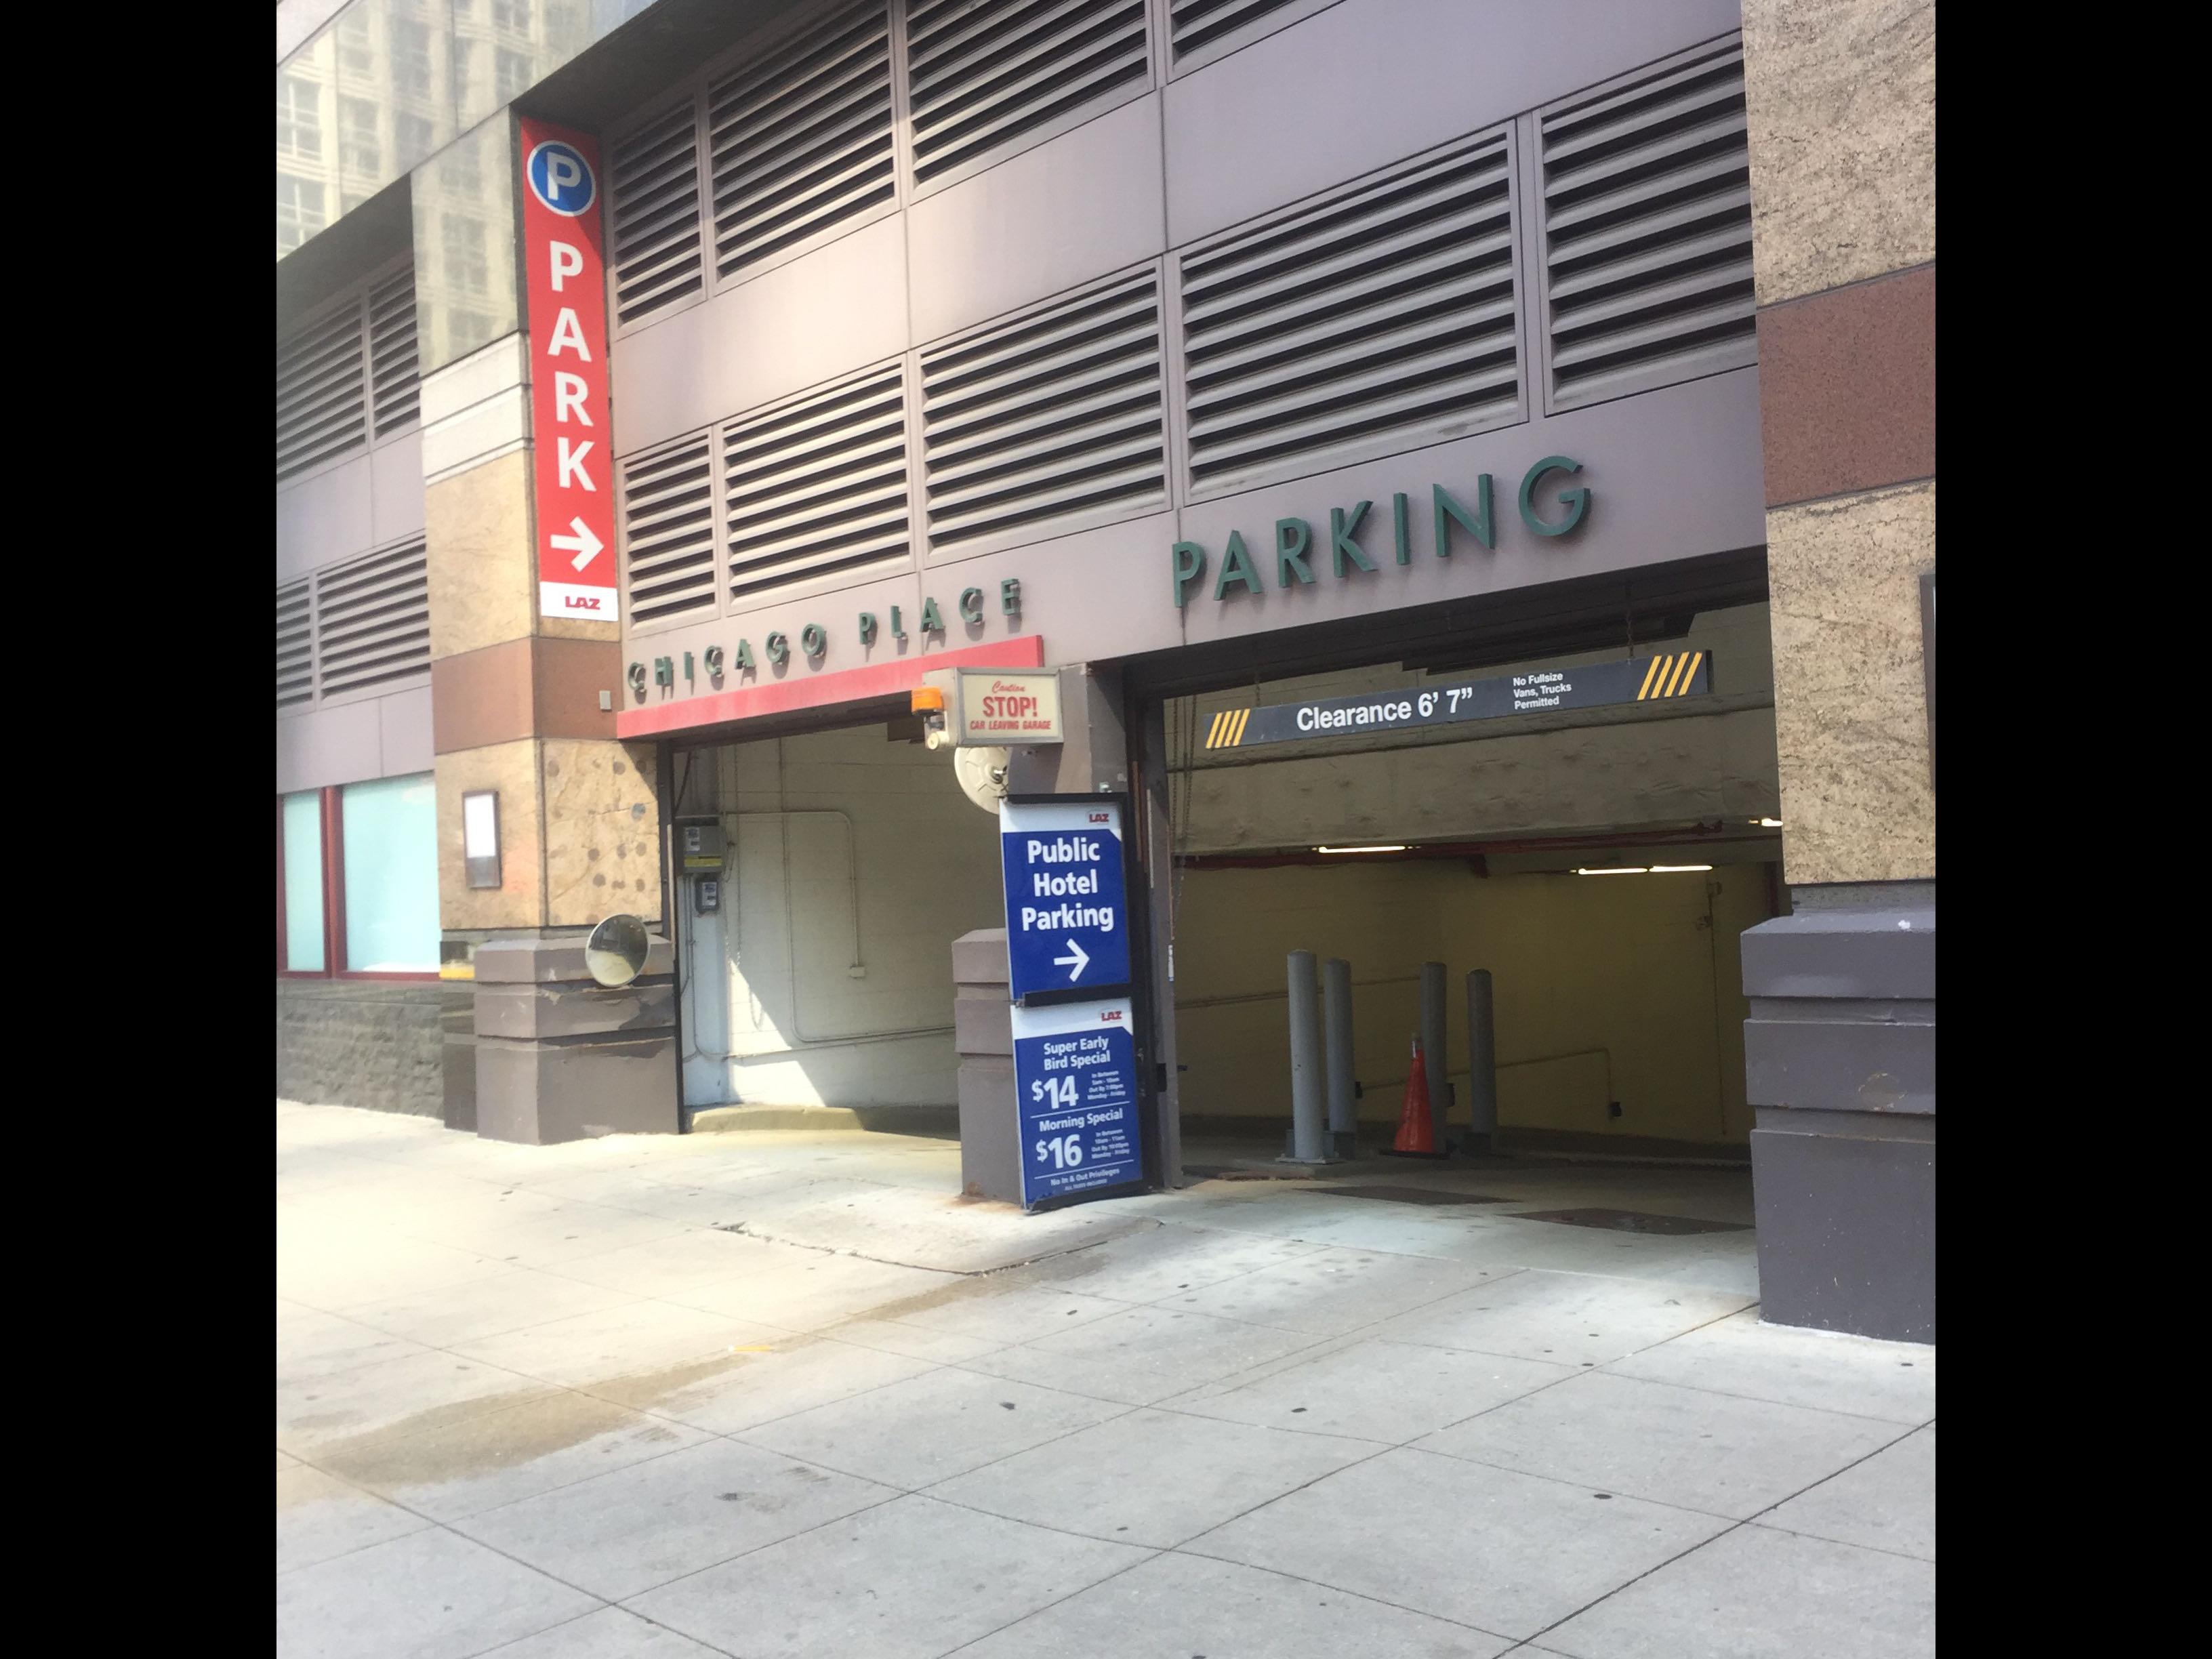 Chicago Place - Parking in Chicago